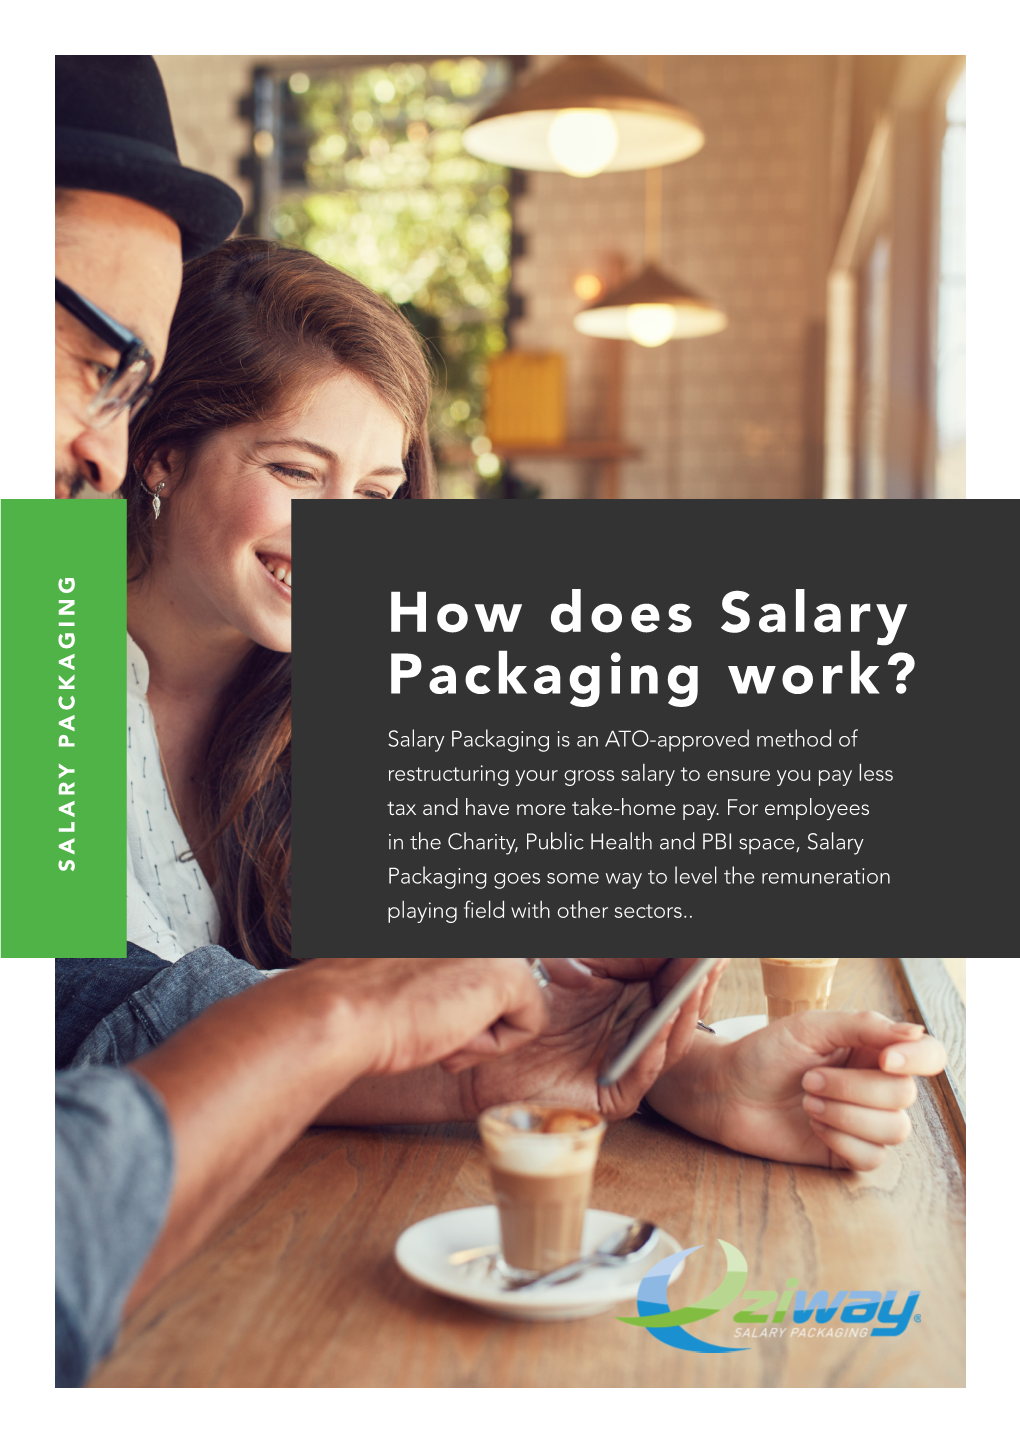 How Does Salary Packaging Work?